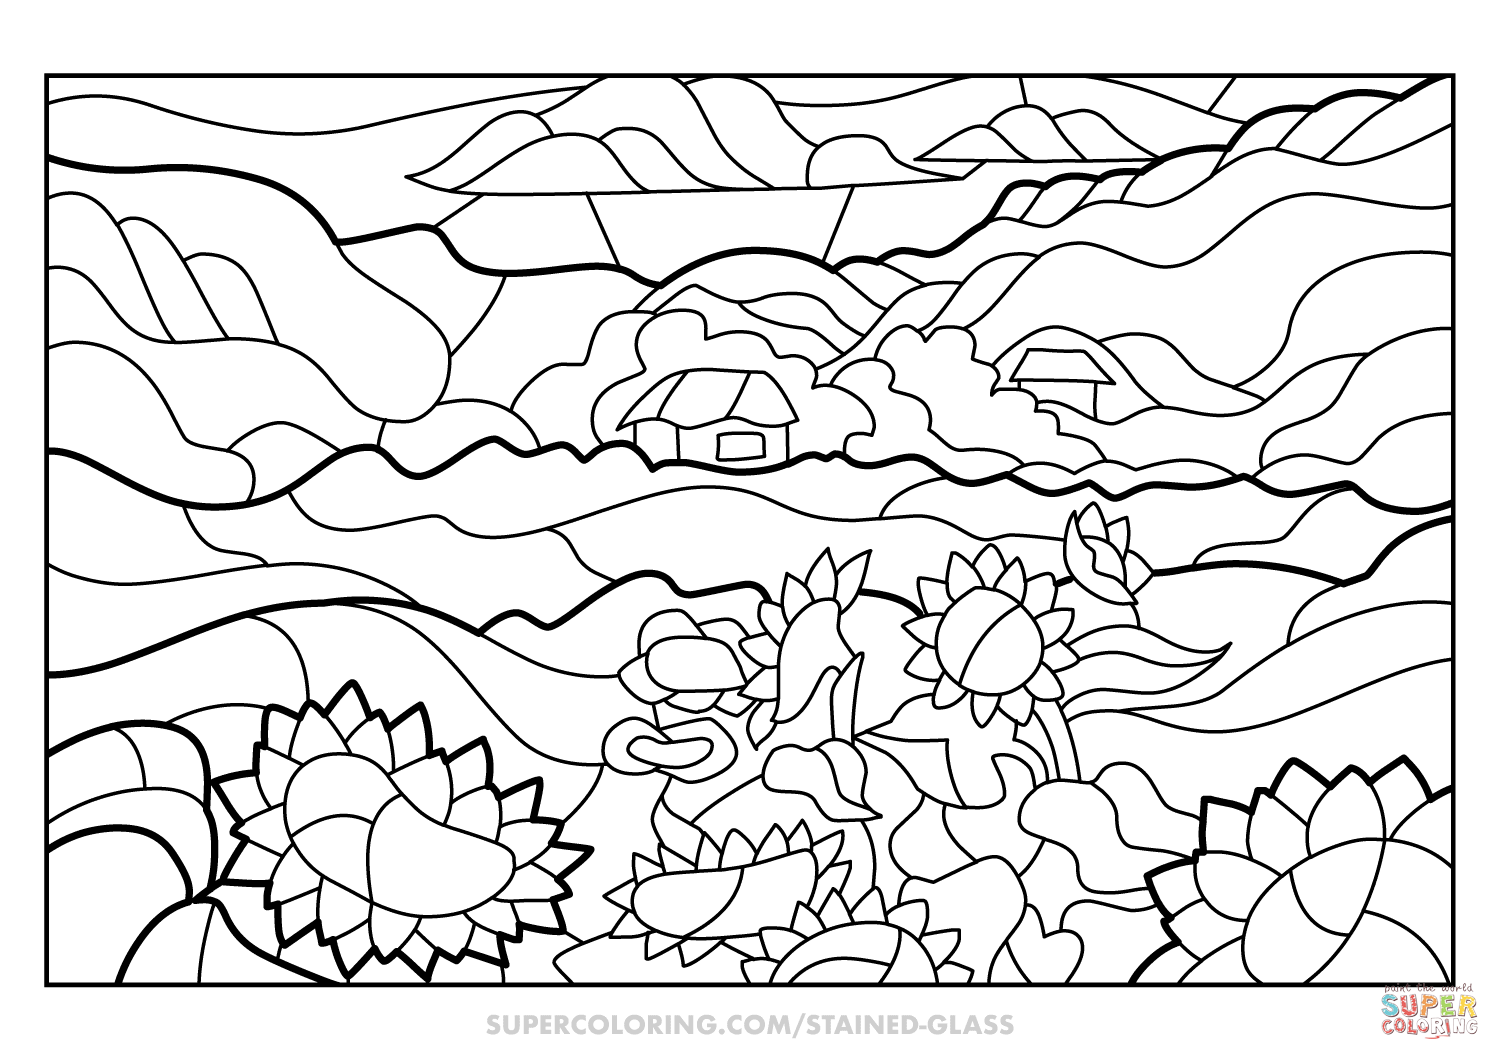 Sunflowers stained glass coloring page free printable coloring pages